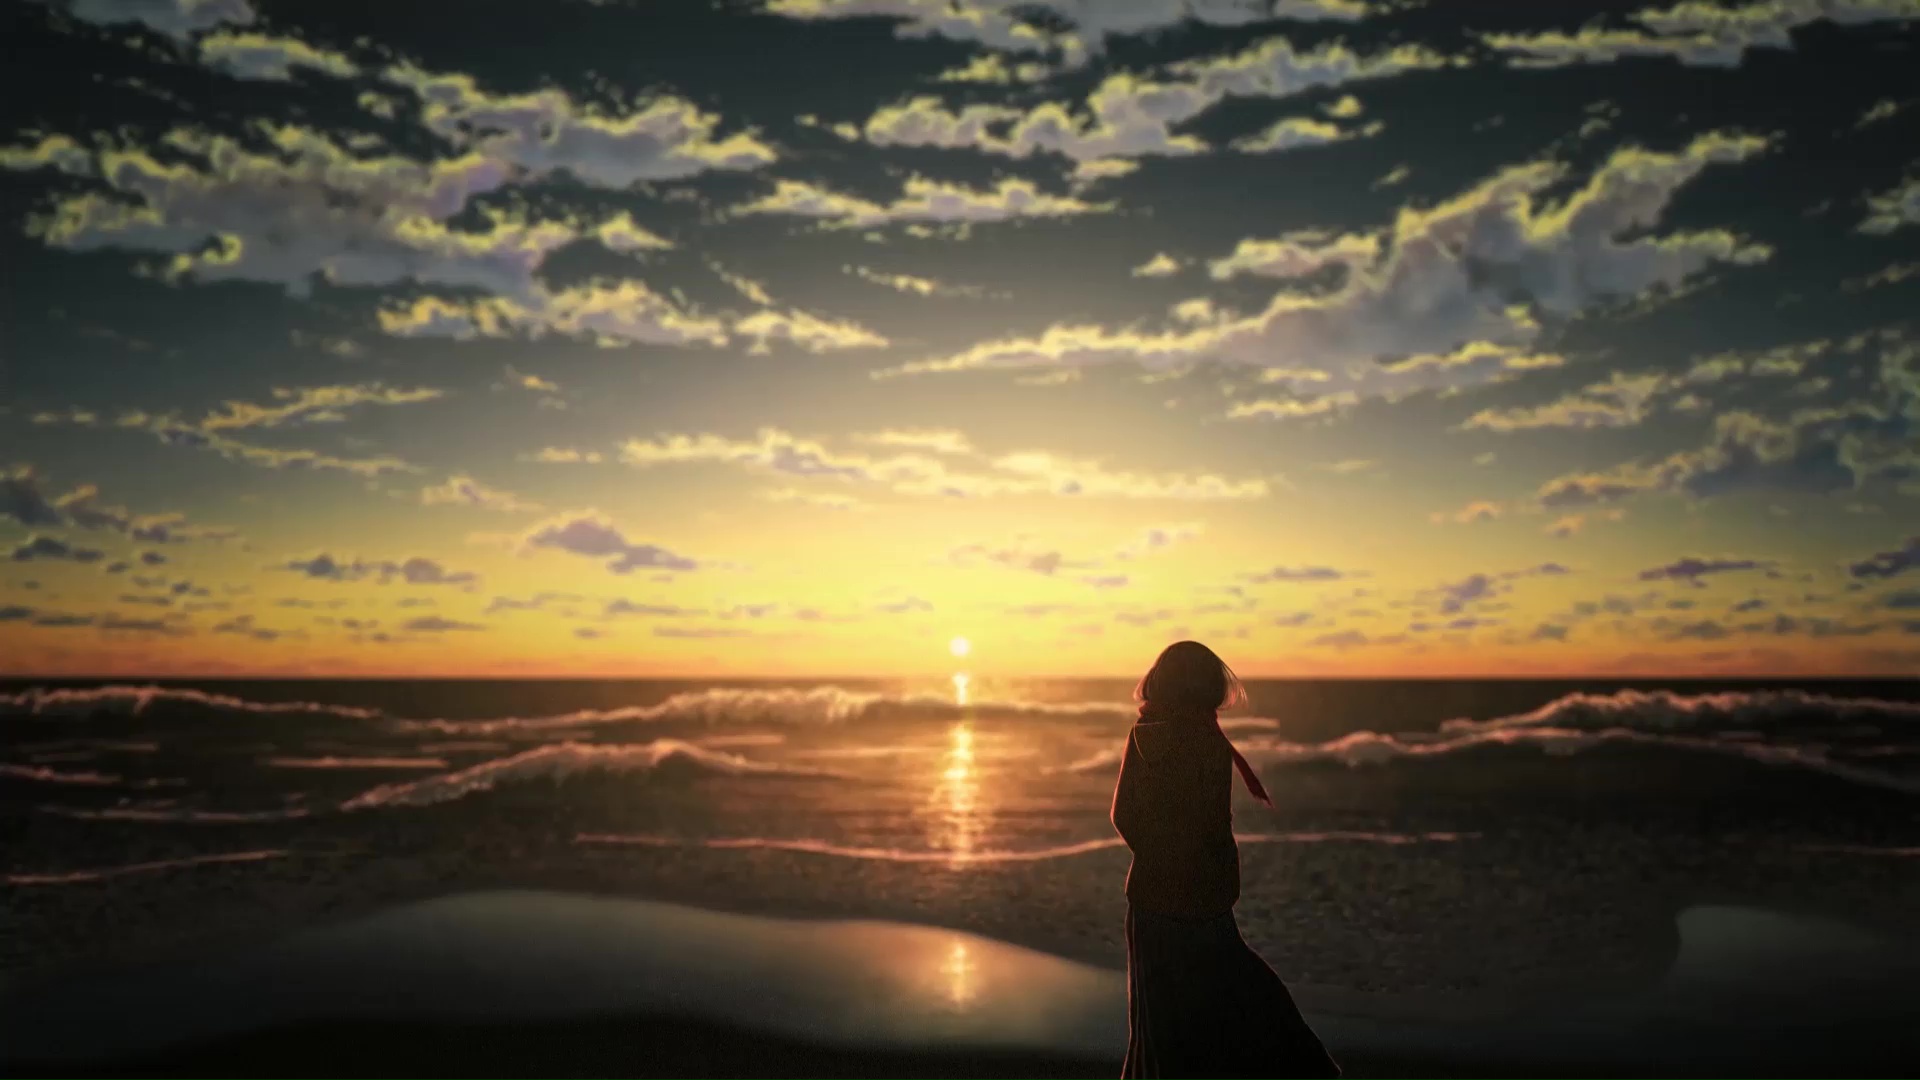 Anime Girl Watching The Sunset On The Beach Live Wallpaper - MoeWalls